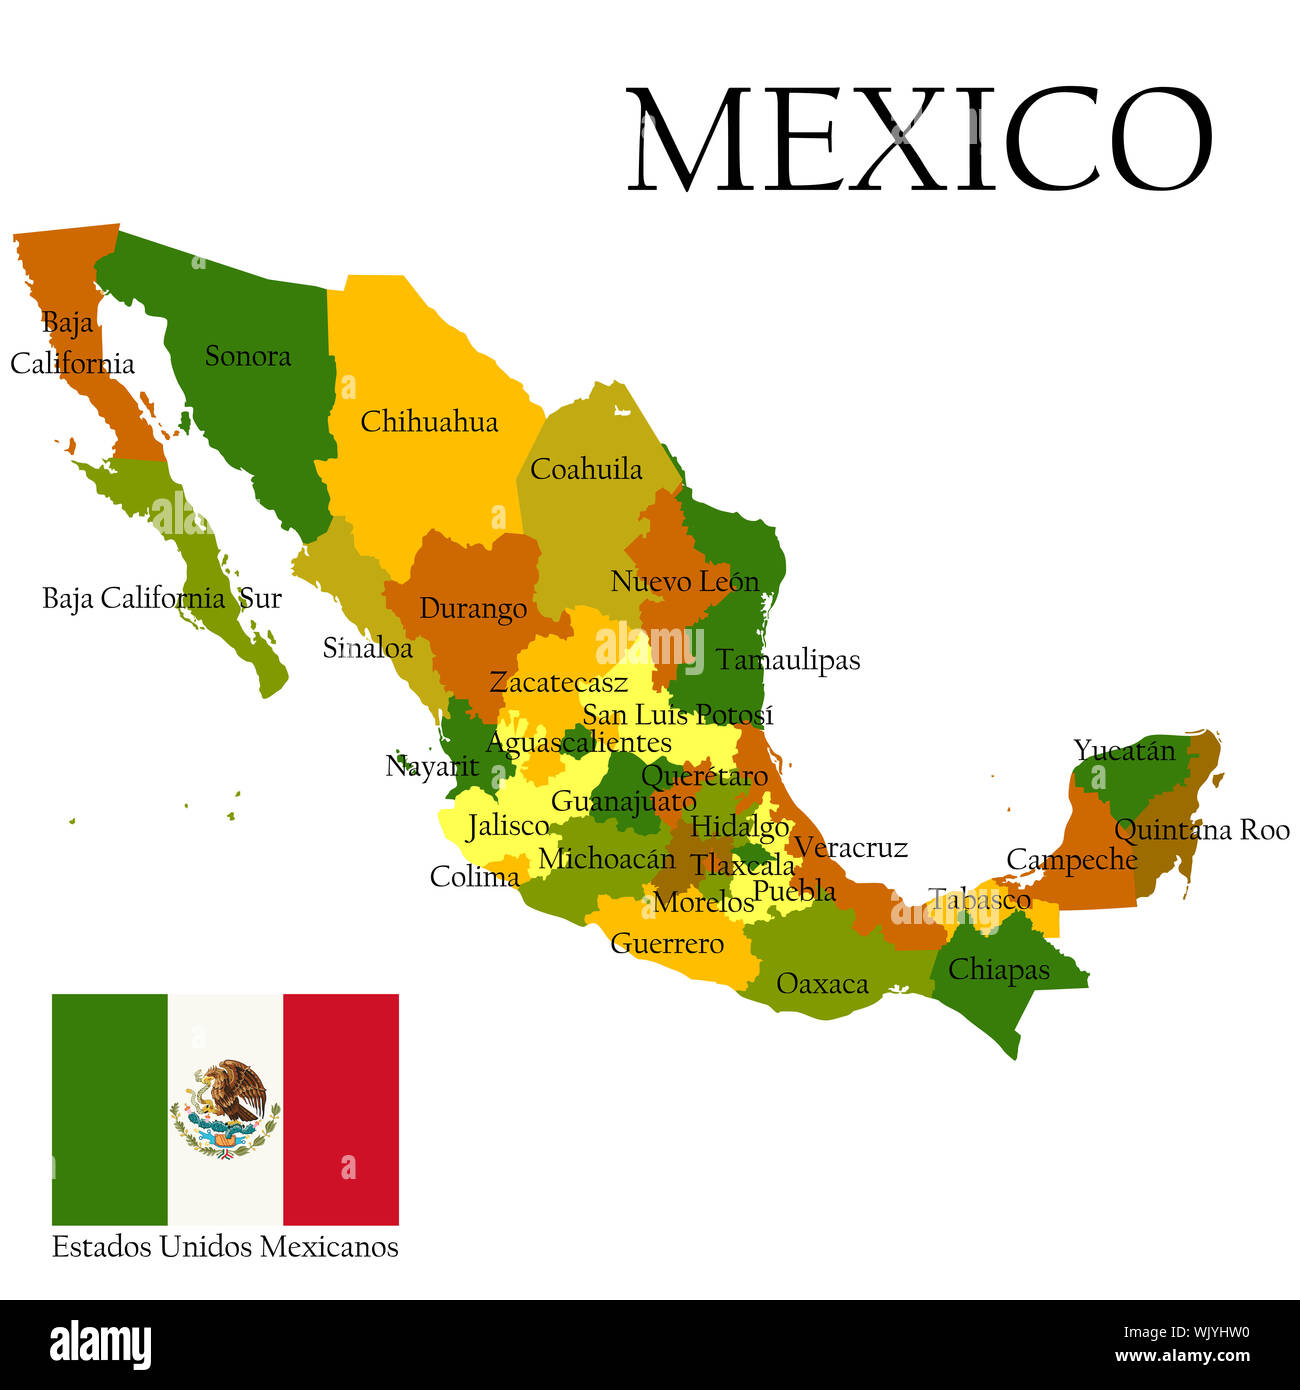 Mexico, United States of. Administrative map and flag. Stock Photo